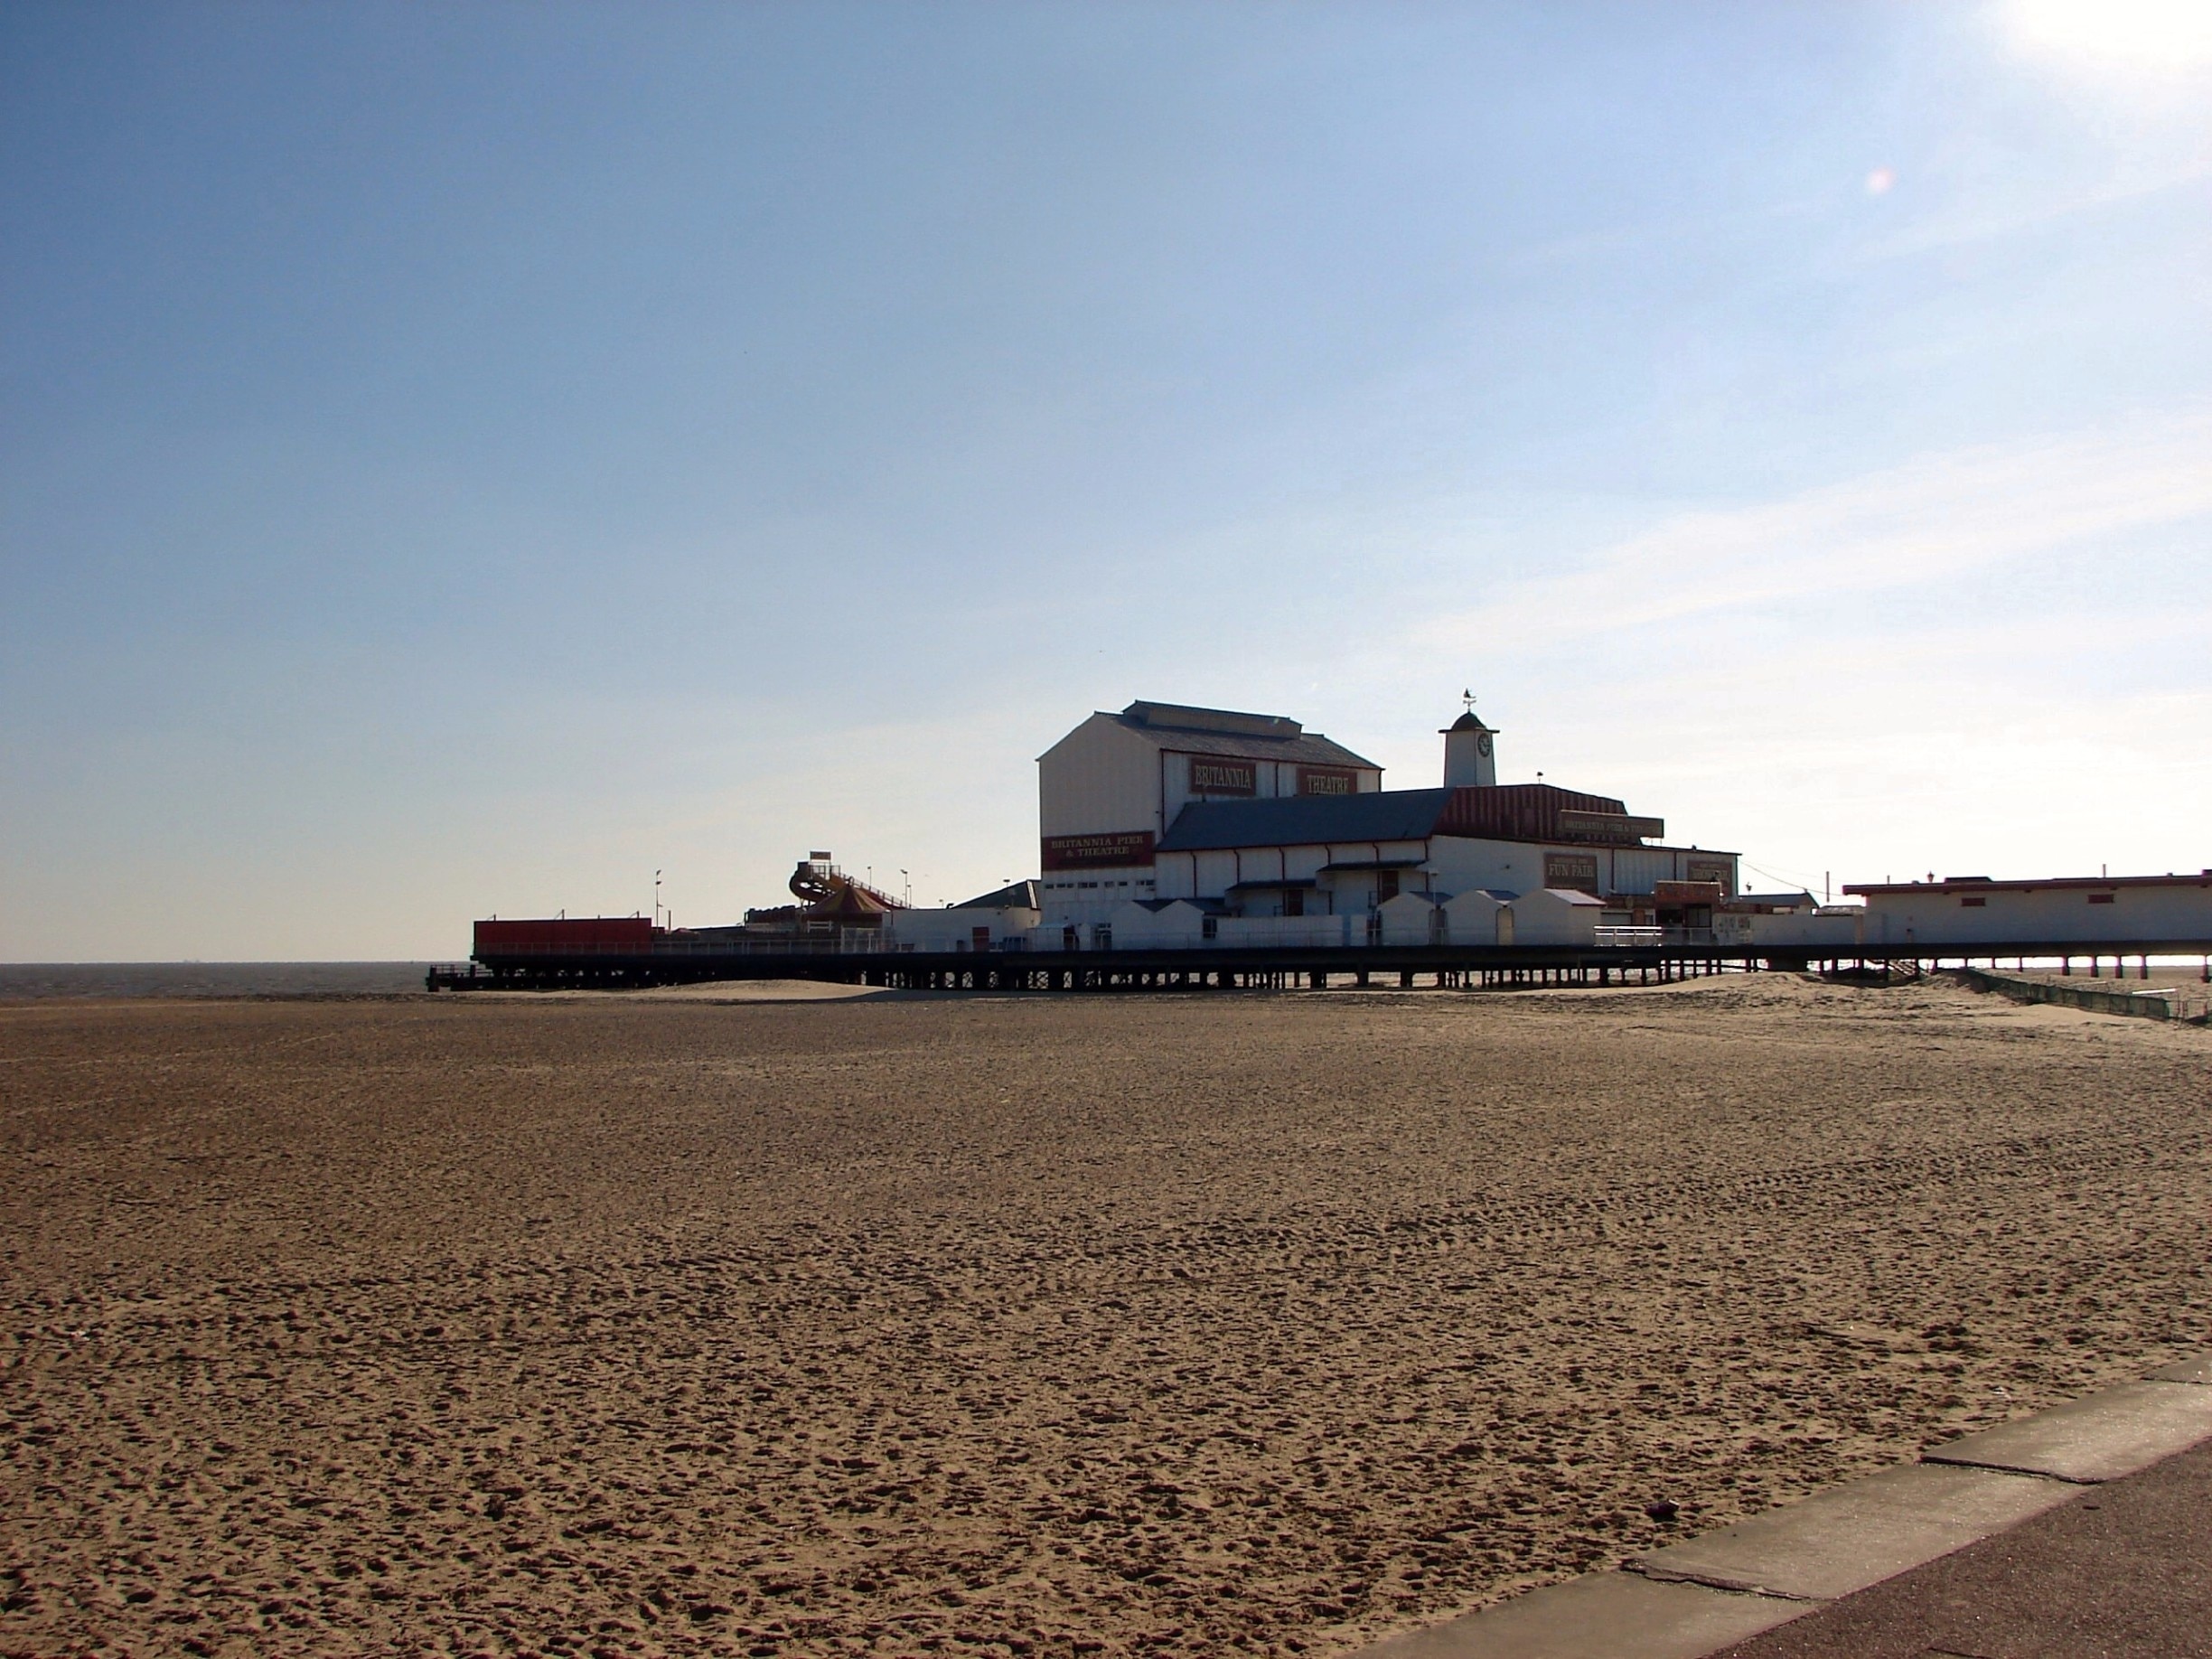 Situated at the heart of Great Yarmouth's sea front, Britannia Pier has something to offer everyone - live shows, great food, amusements, rides and more